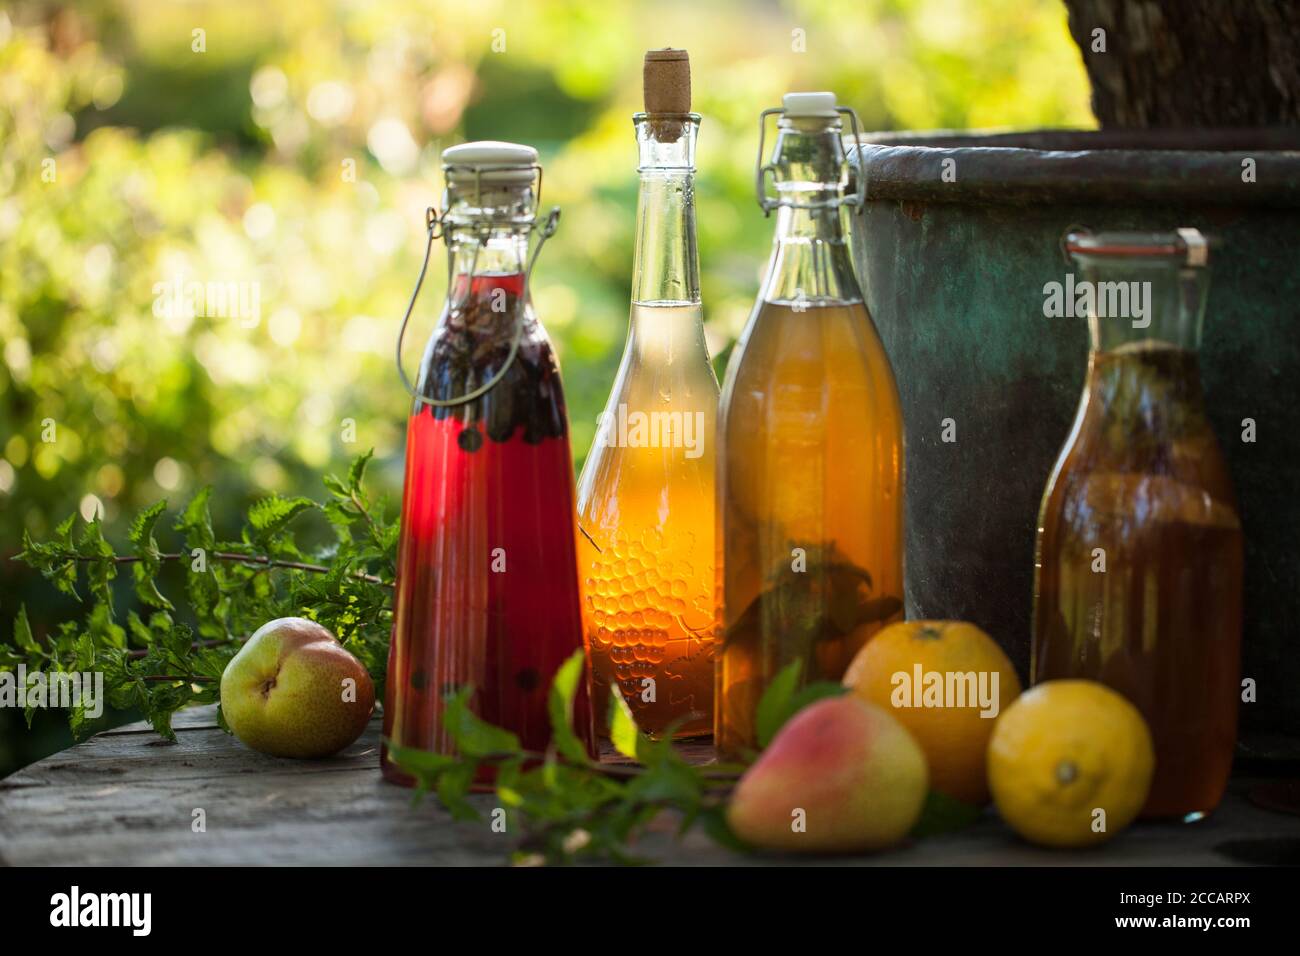 Kombucha second fermented fruit tea with different flavorings. Healthy natural probiotic flavored drink Stock Photo